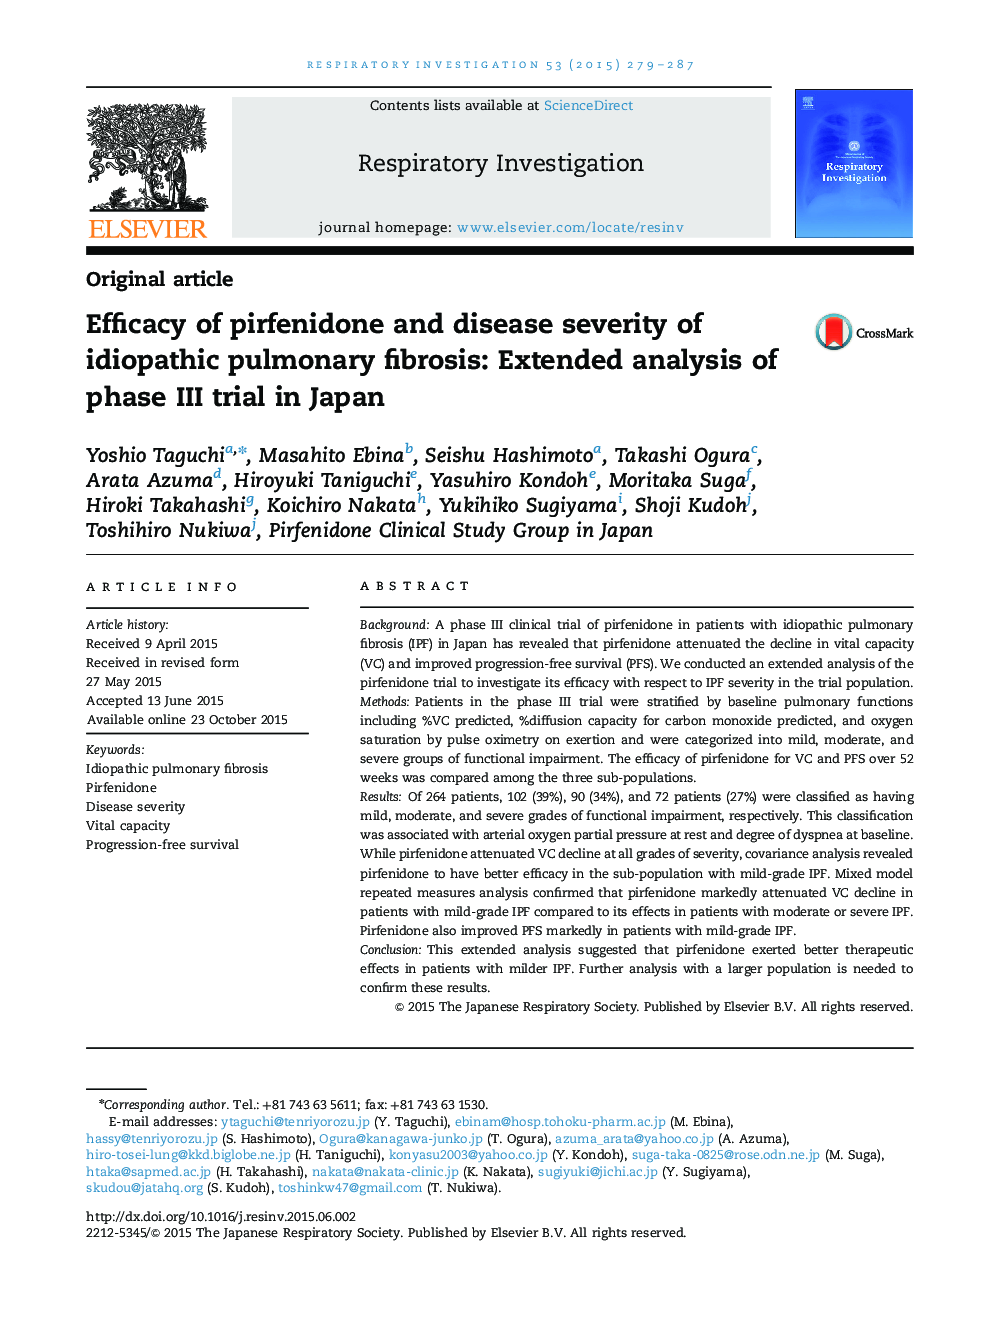 Efficacy of pirfenidone and disease severity of idiopathic pulmonary fibrosis: Extended analysis of phase III trial in Japan